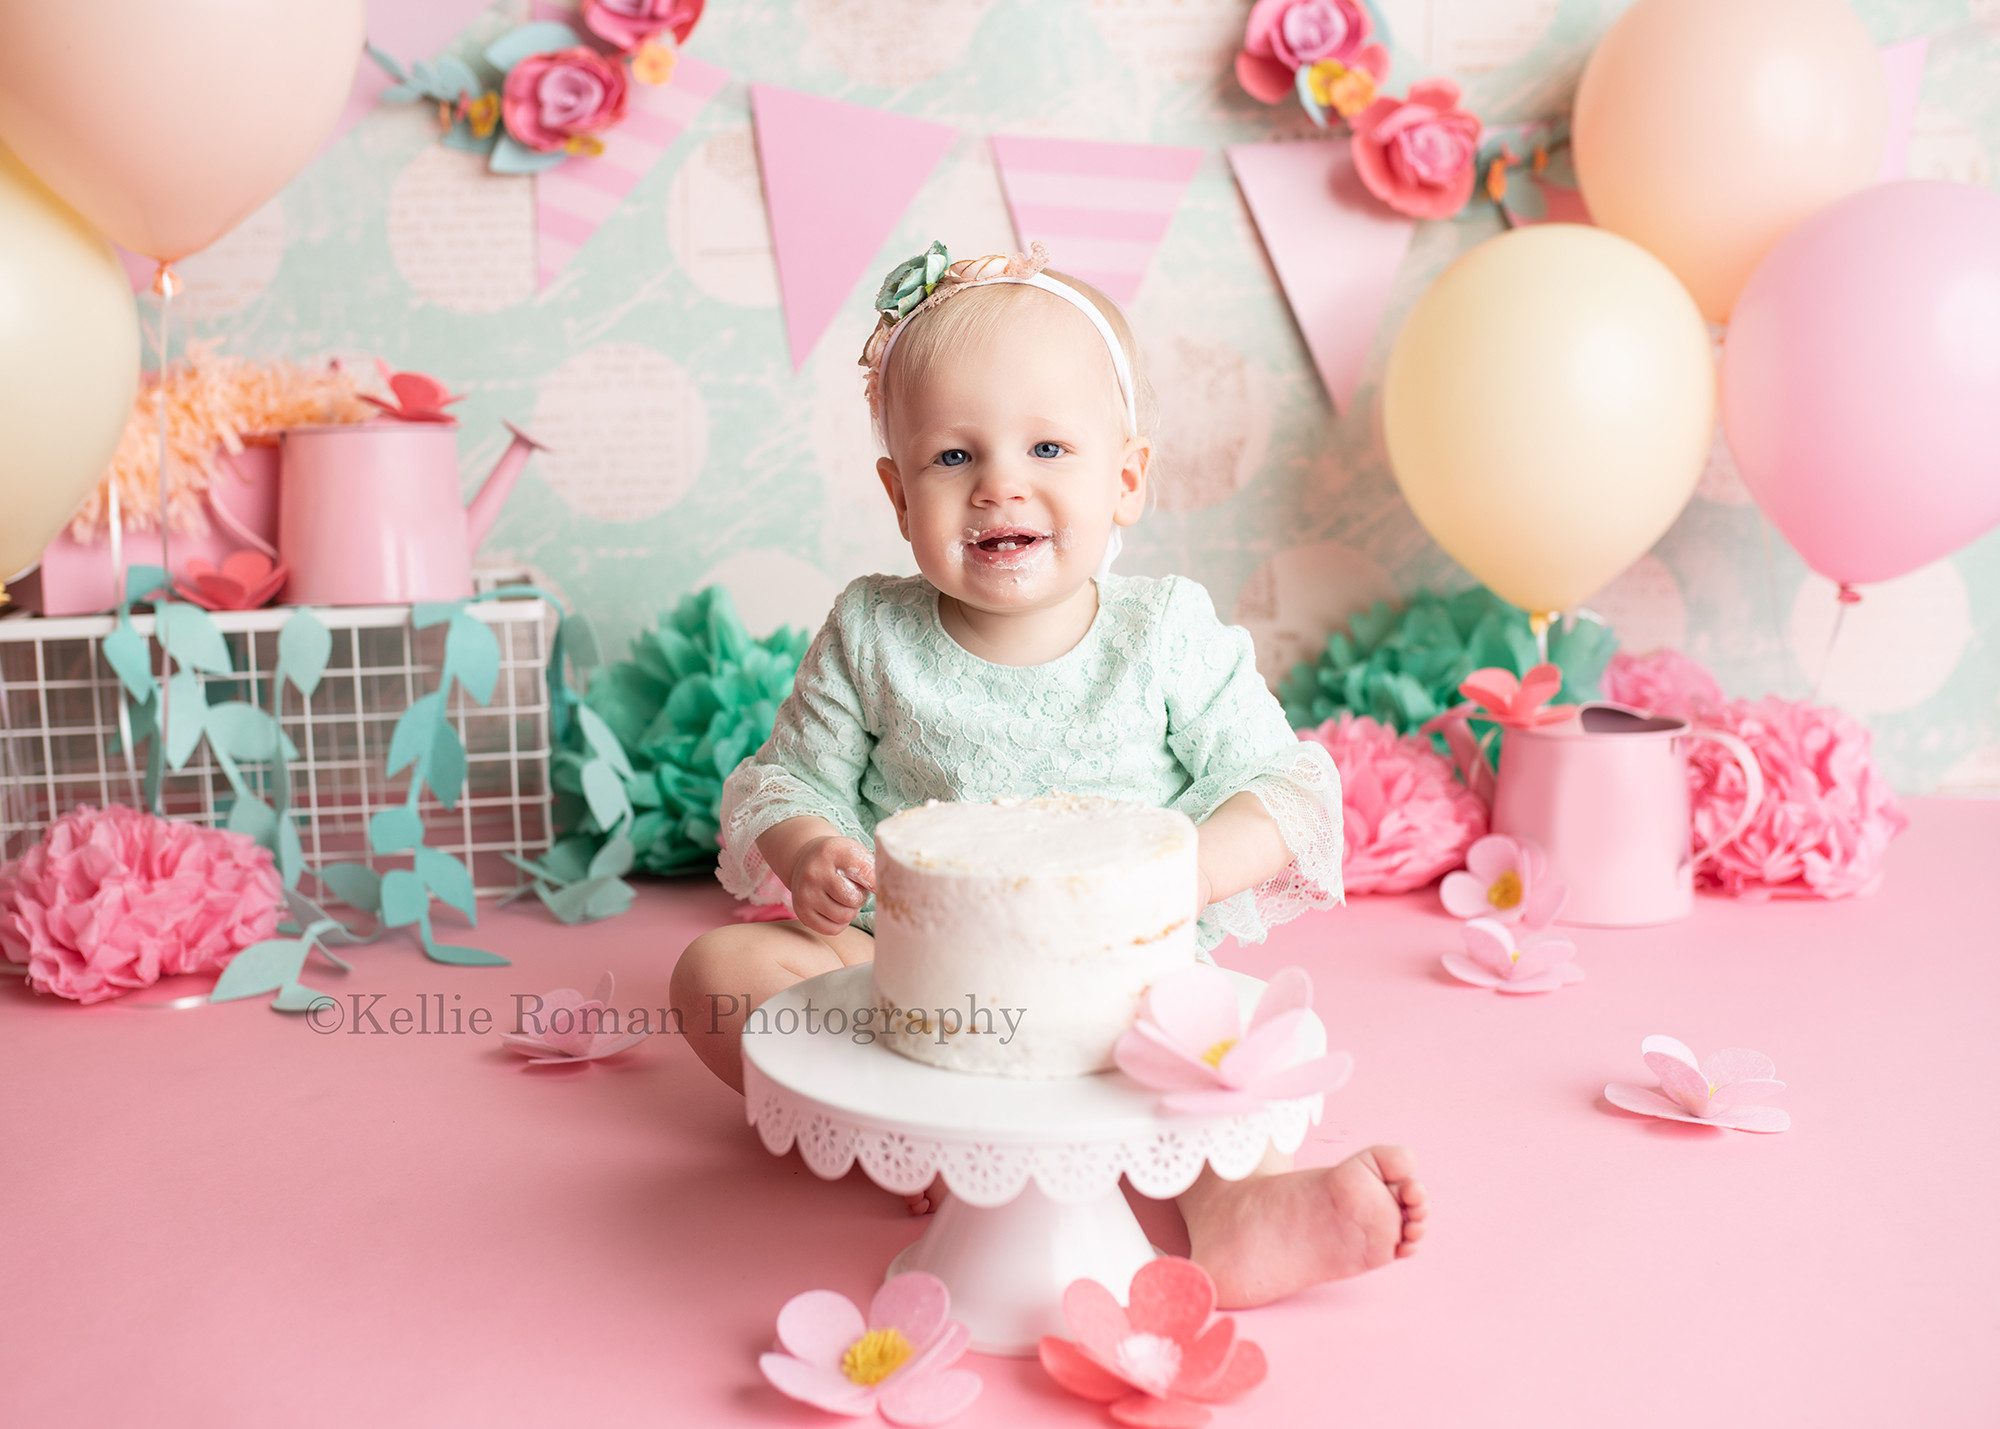 Spring cake smash. a one year old little girl is in a milwaukee photography studio having her cake smash photos taken. She's sitting in front of a teal polka dot backdrop with a pink banner and floral metal hoops. There are pastel peach, pink, and orange balloons. There is floral pink and teal decor around her with watering cans. She wearing a light teal romper and is sitting behind a cake style white frosted cake onto of a white cake stand. She's smiling at the camera